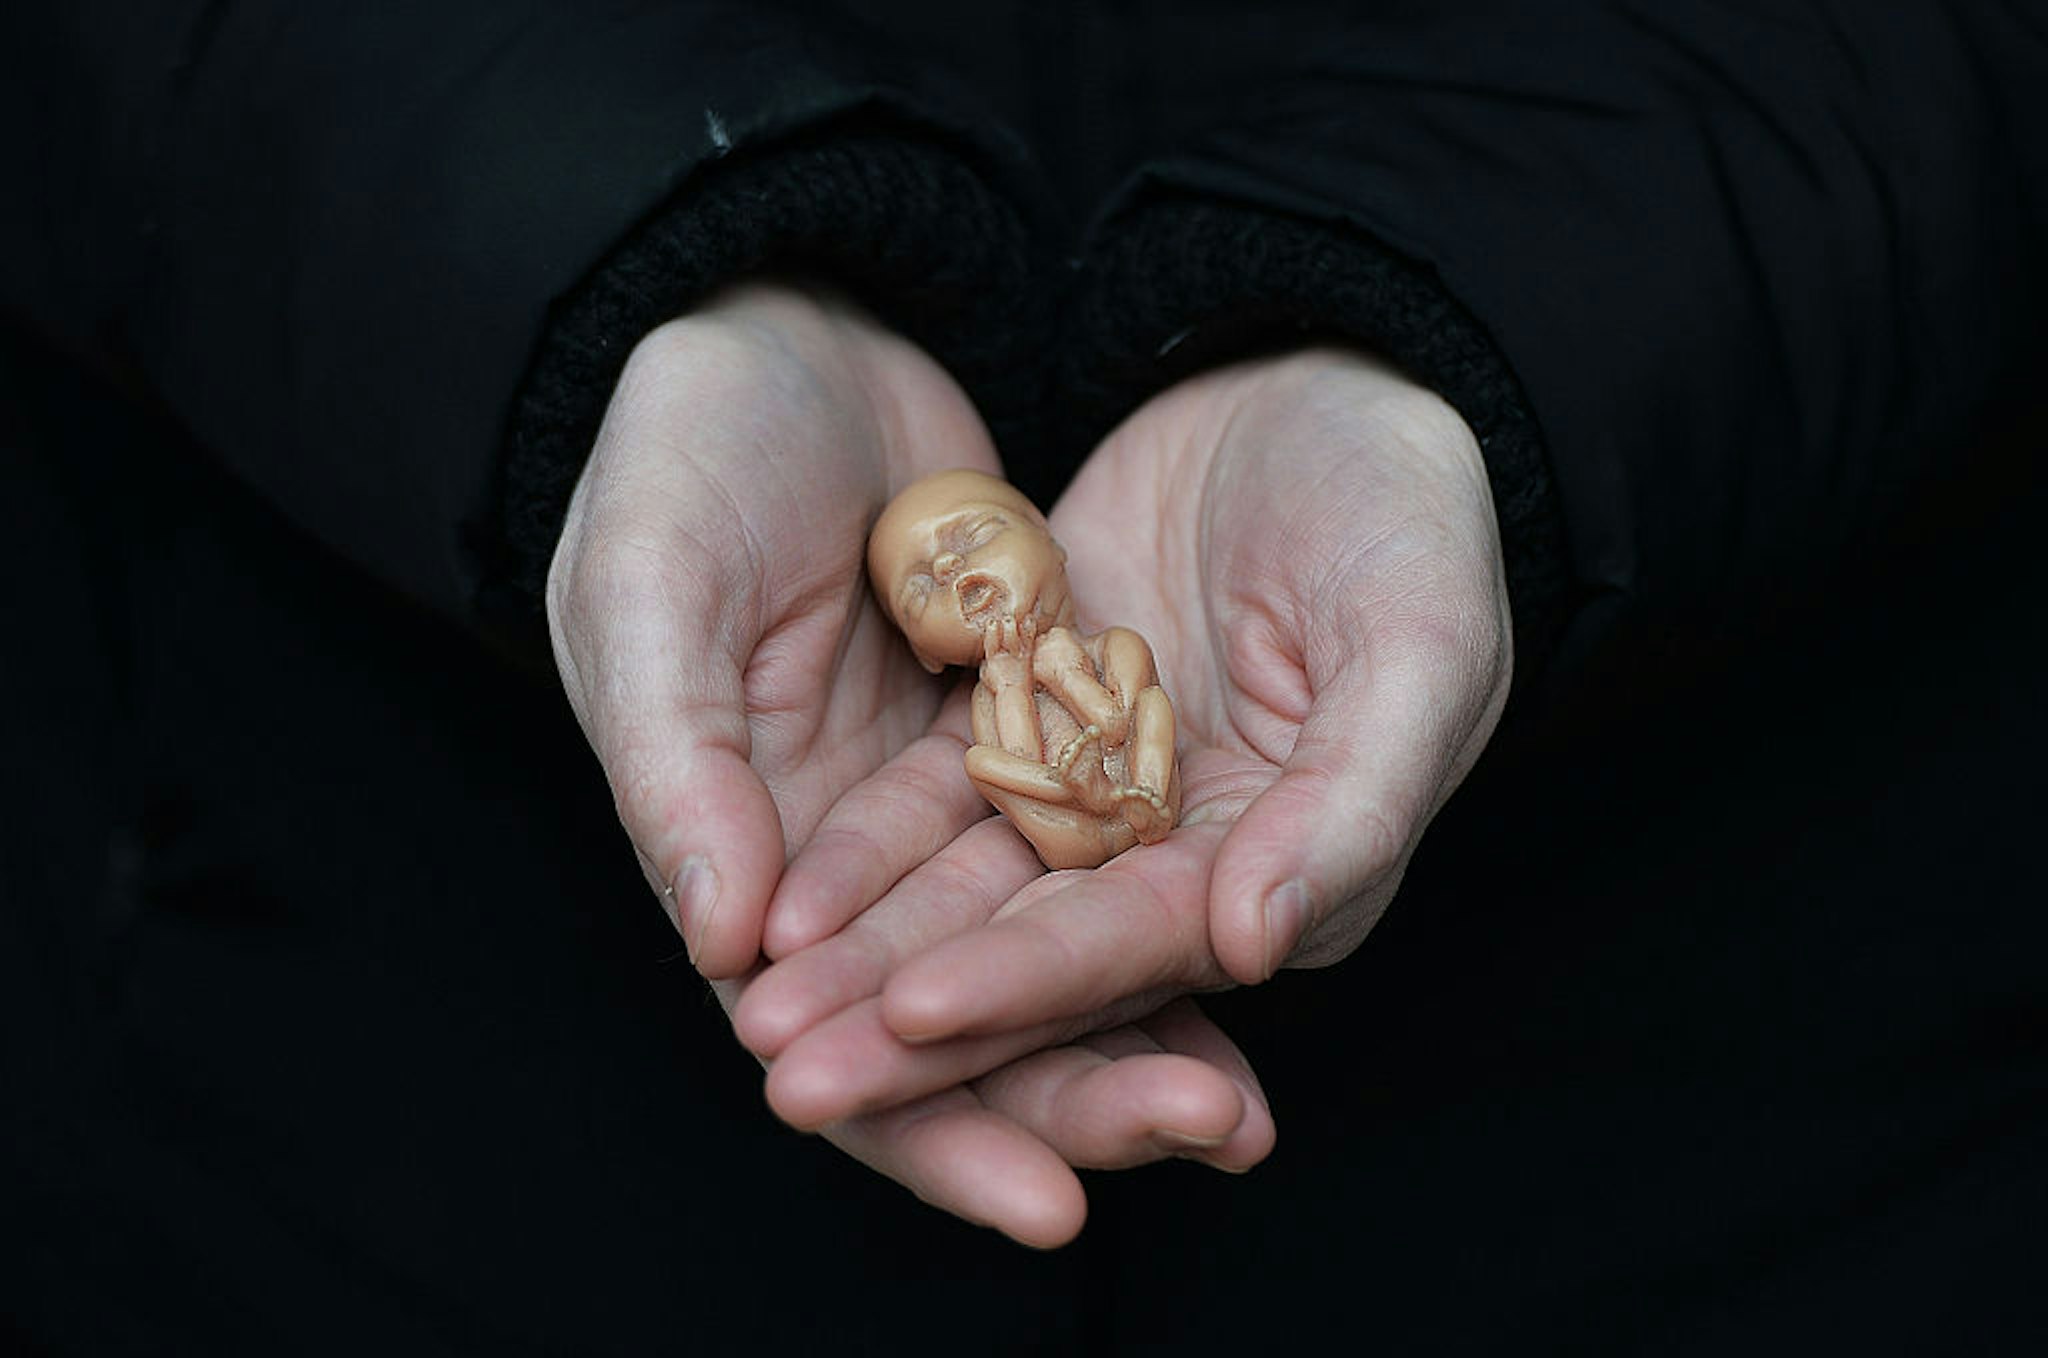 BELFAST, NORTHERN IRELAND - APRIL 07: A Pro Life campaigner displays a plastic doll representing a 12 week old foetus as she stands outside the Marie Stopes Clinic on April 7, 2016 in Belfast, Northern Ireland. The anit abortion supporters have protested outside the clinic where women can go for advice concerning terminating their pregnancy since it opened in 2012. The abortion laws in Northern Ireland are in the news again after a 21 year old Northern Irish woman was convicted and sentenced earlier this week for procuring a miscarriage. The woman who cannot be named for legal reasons had pleaded guilty to two charges of procuring her own abortion by using a poison and of supplying a poison with intent to procure a miscarriage, she was ten-twelve weeks pregnant at the time. She was given a three-month prison sentence by Judge David McFarland at Belfast high court, which was suspended for two years. Unlike the rest of the United Kingdom, the law in Northern Ireland rules that terminating a pregnancy is illegal except in very limited circumstances. (Photo by Charles McQuillan/Getty Images)